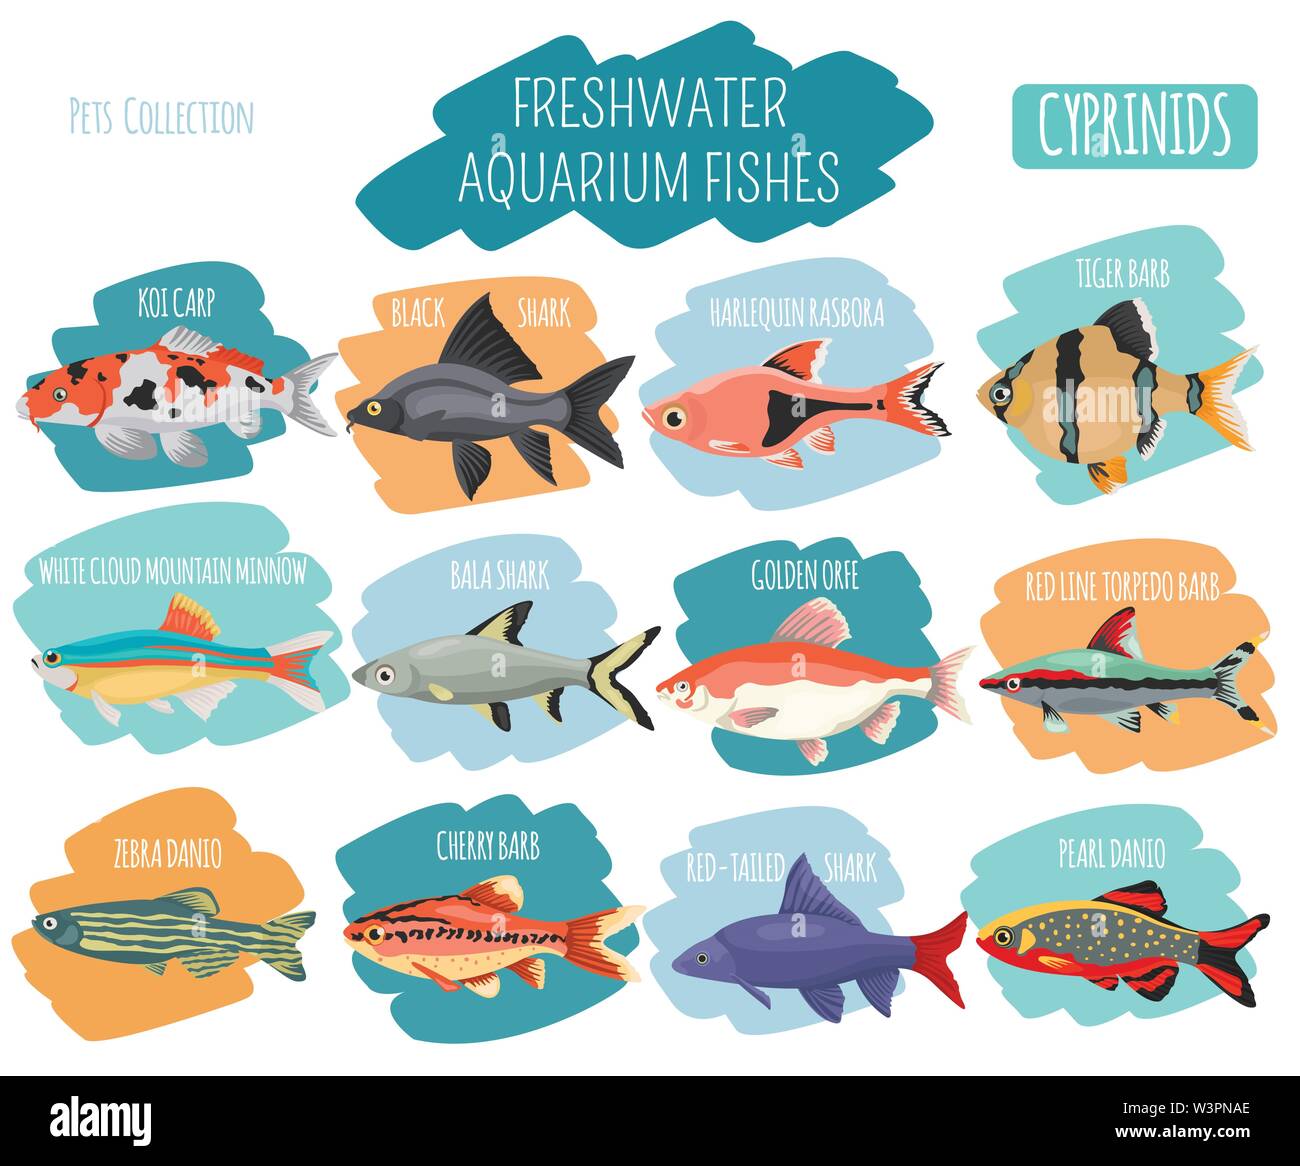 Freshwater aquarium fishes breeds icon set flat style isolated on white. Cyprinids. Create own infographic about pets. Vector illustration Stock Vector